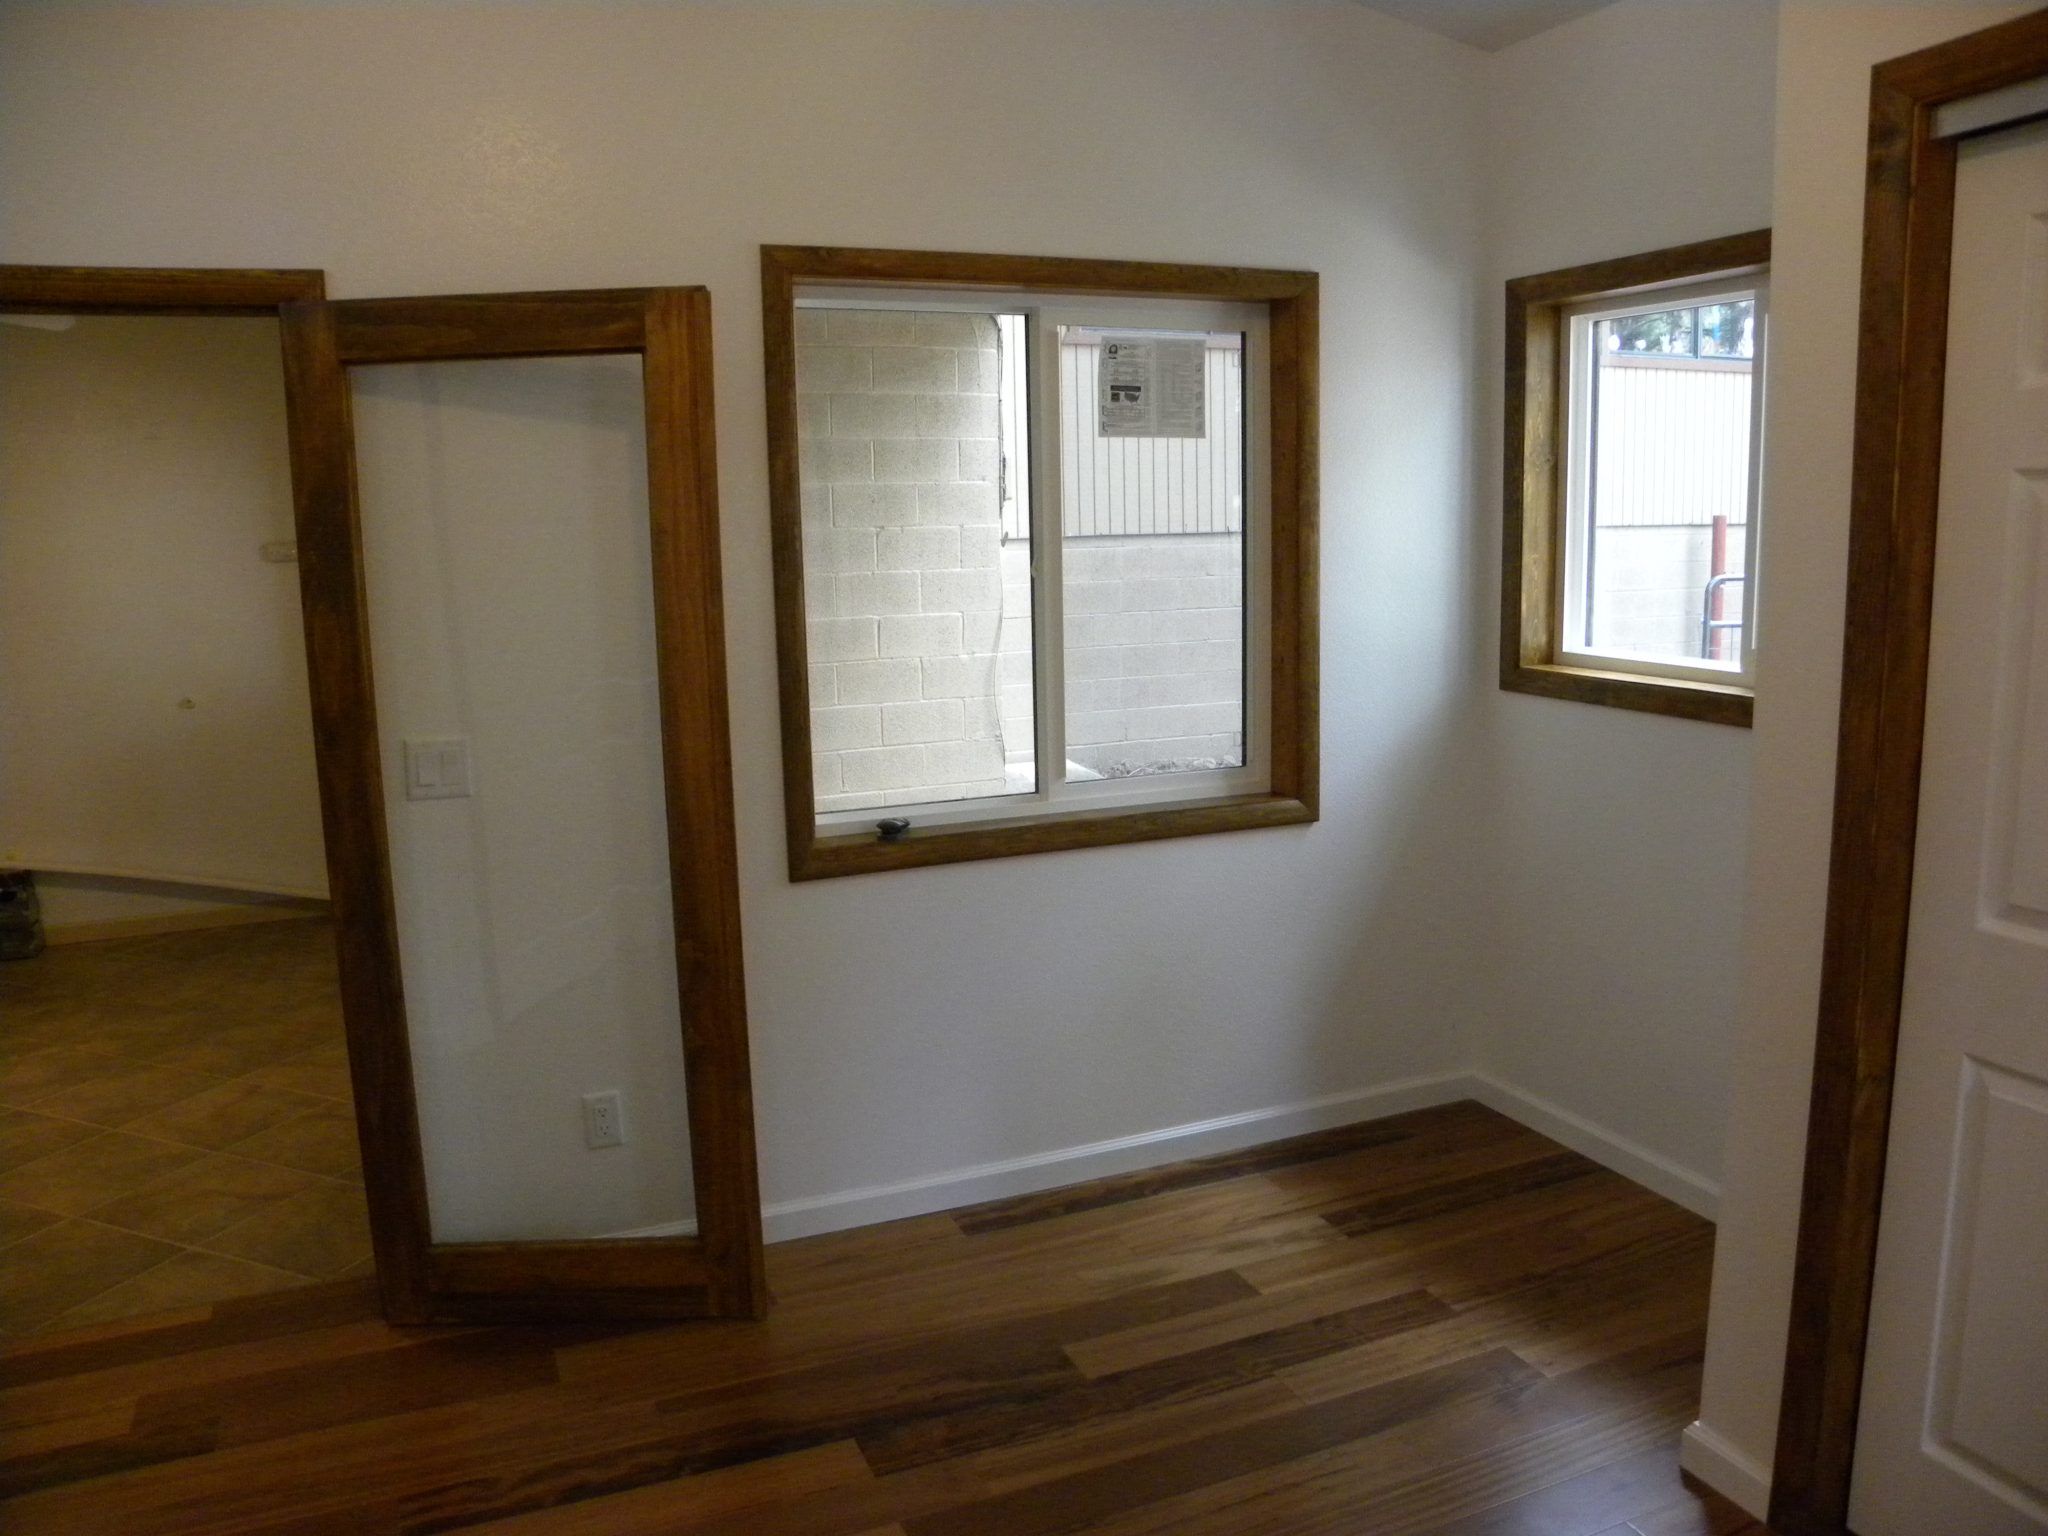 Interior shot of wood trimmed windows and doorways with new wooden flooring